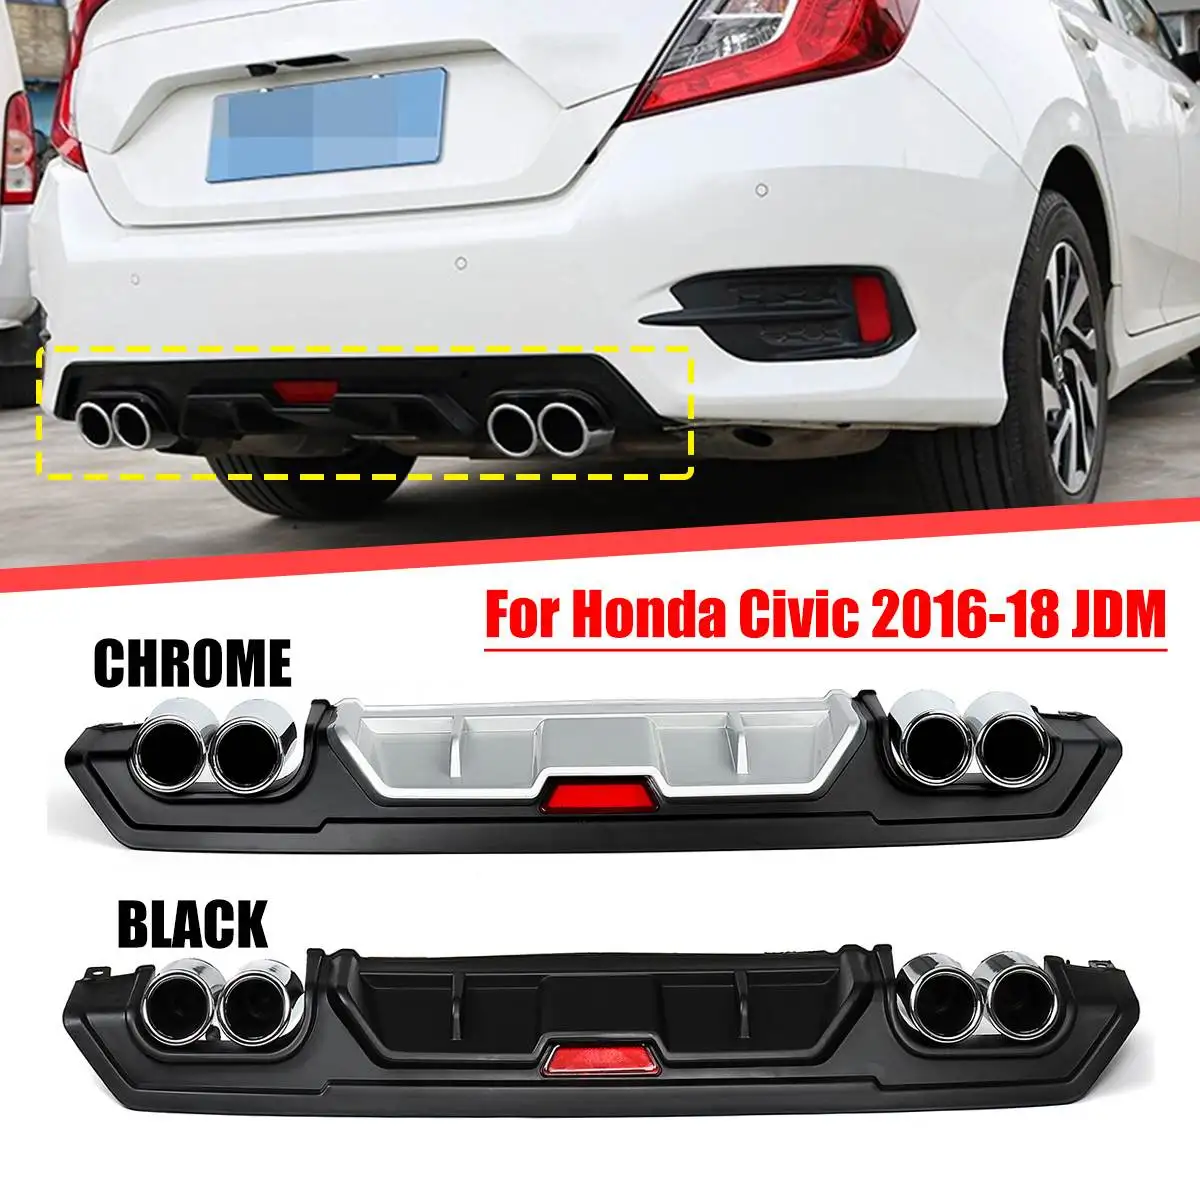 

Black/Chrome Rear Lower Bumper Diffuser with Dual Exhaust Tip Outlet Pipe Decor For Honda For Civic 10th Sedan 4 Door 2016-18JDM